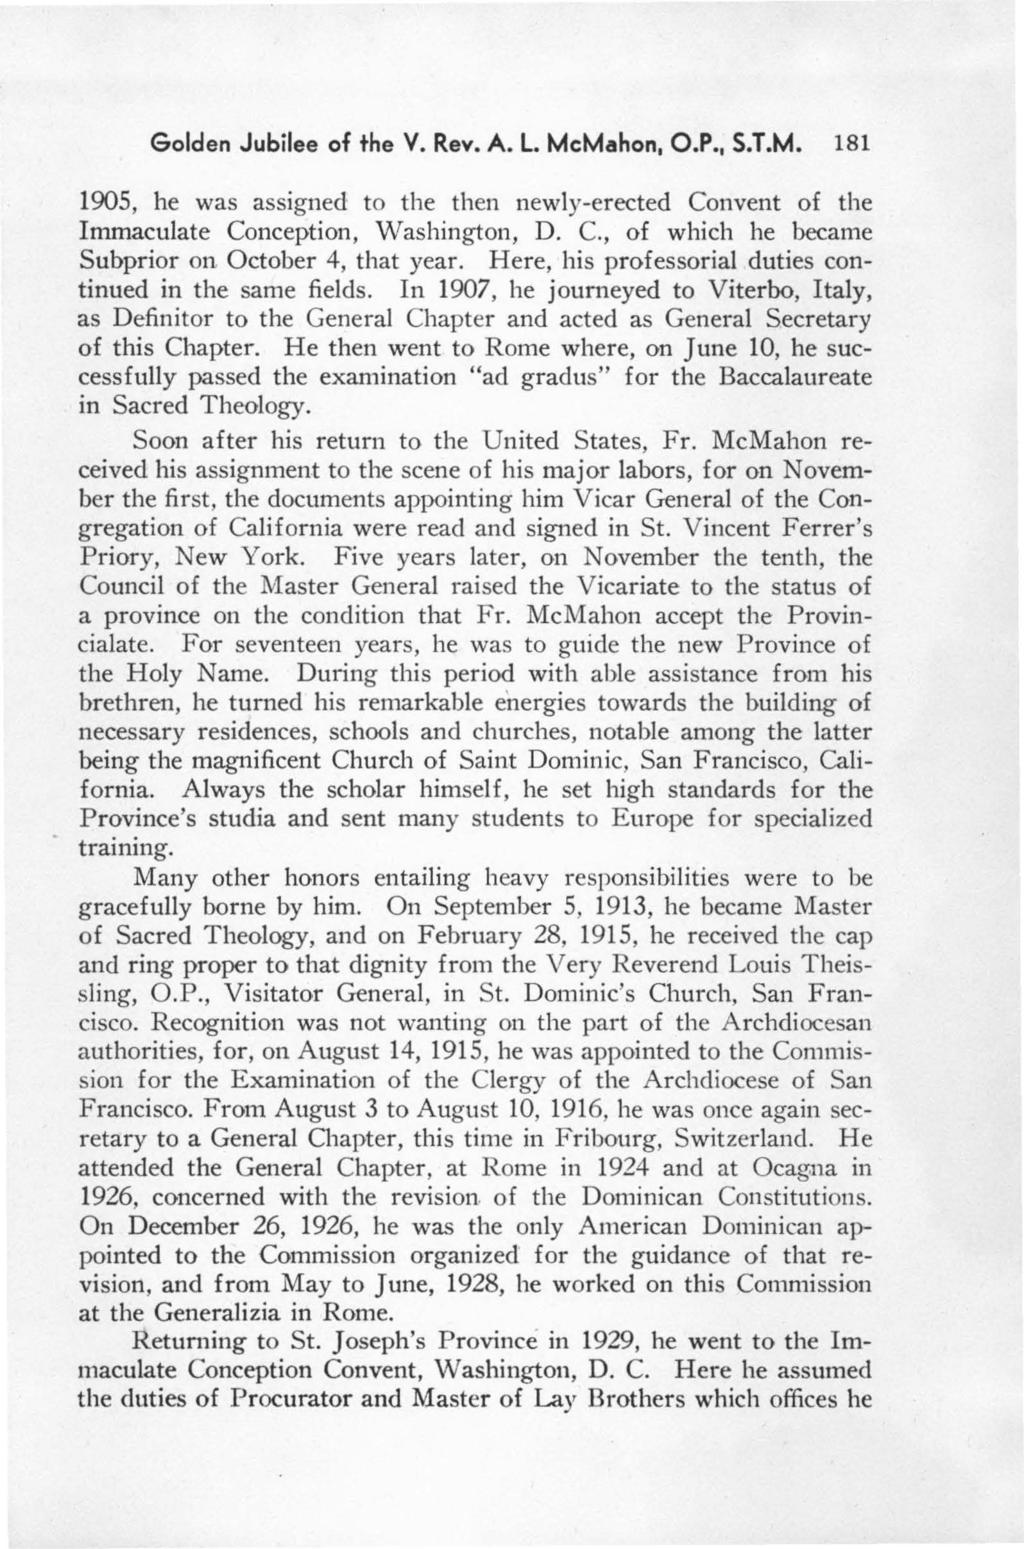 Golden Jubilee of the V. Rev. A. L. McMahon, O.P., S.T.M. 181 1905, he was assigned to the then newly-erected Convent of the Immaculate Conception, Washington, D. C., of which he became Subprior on October 4, that year.